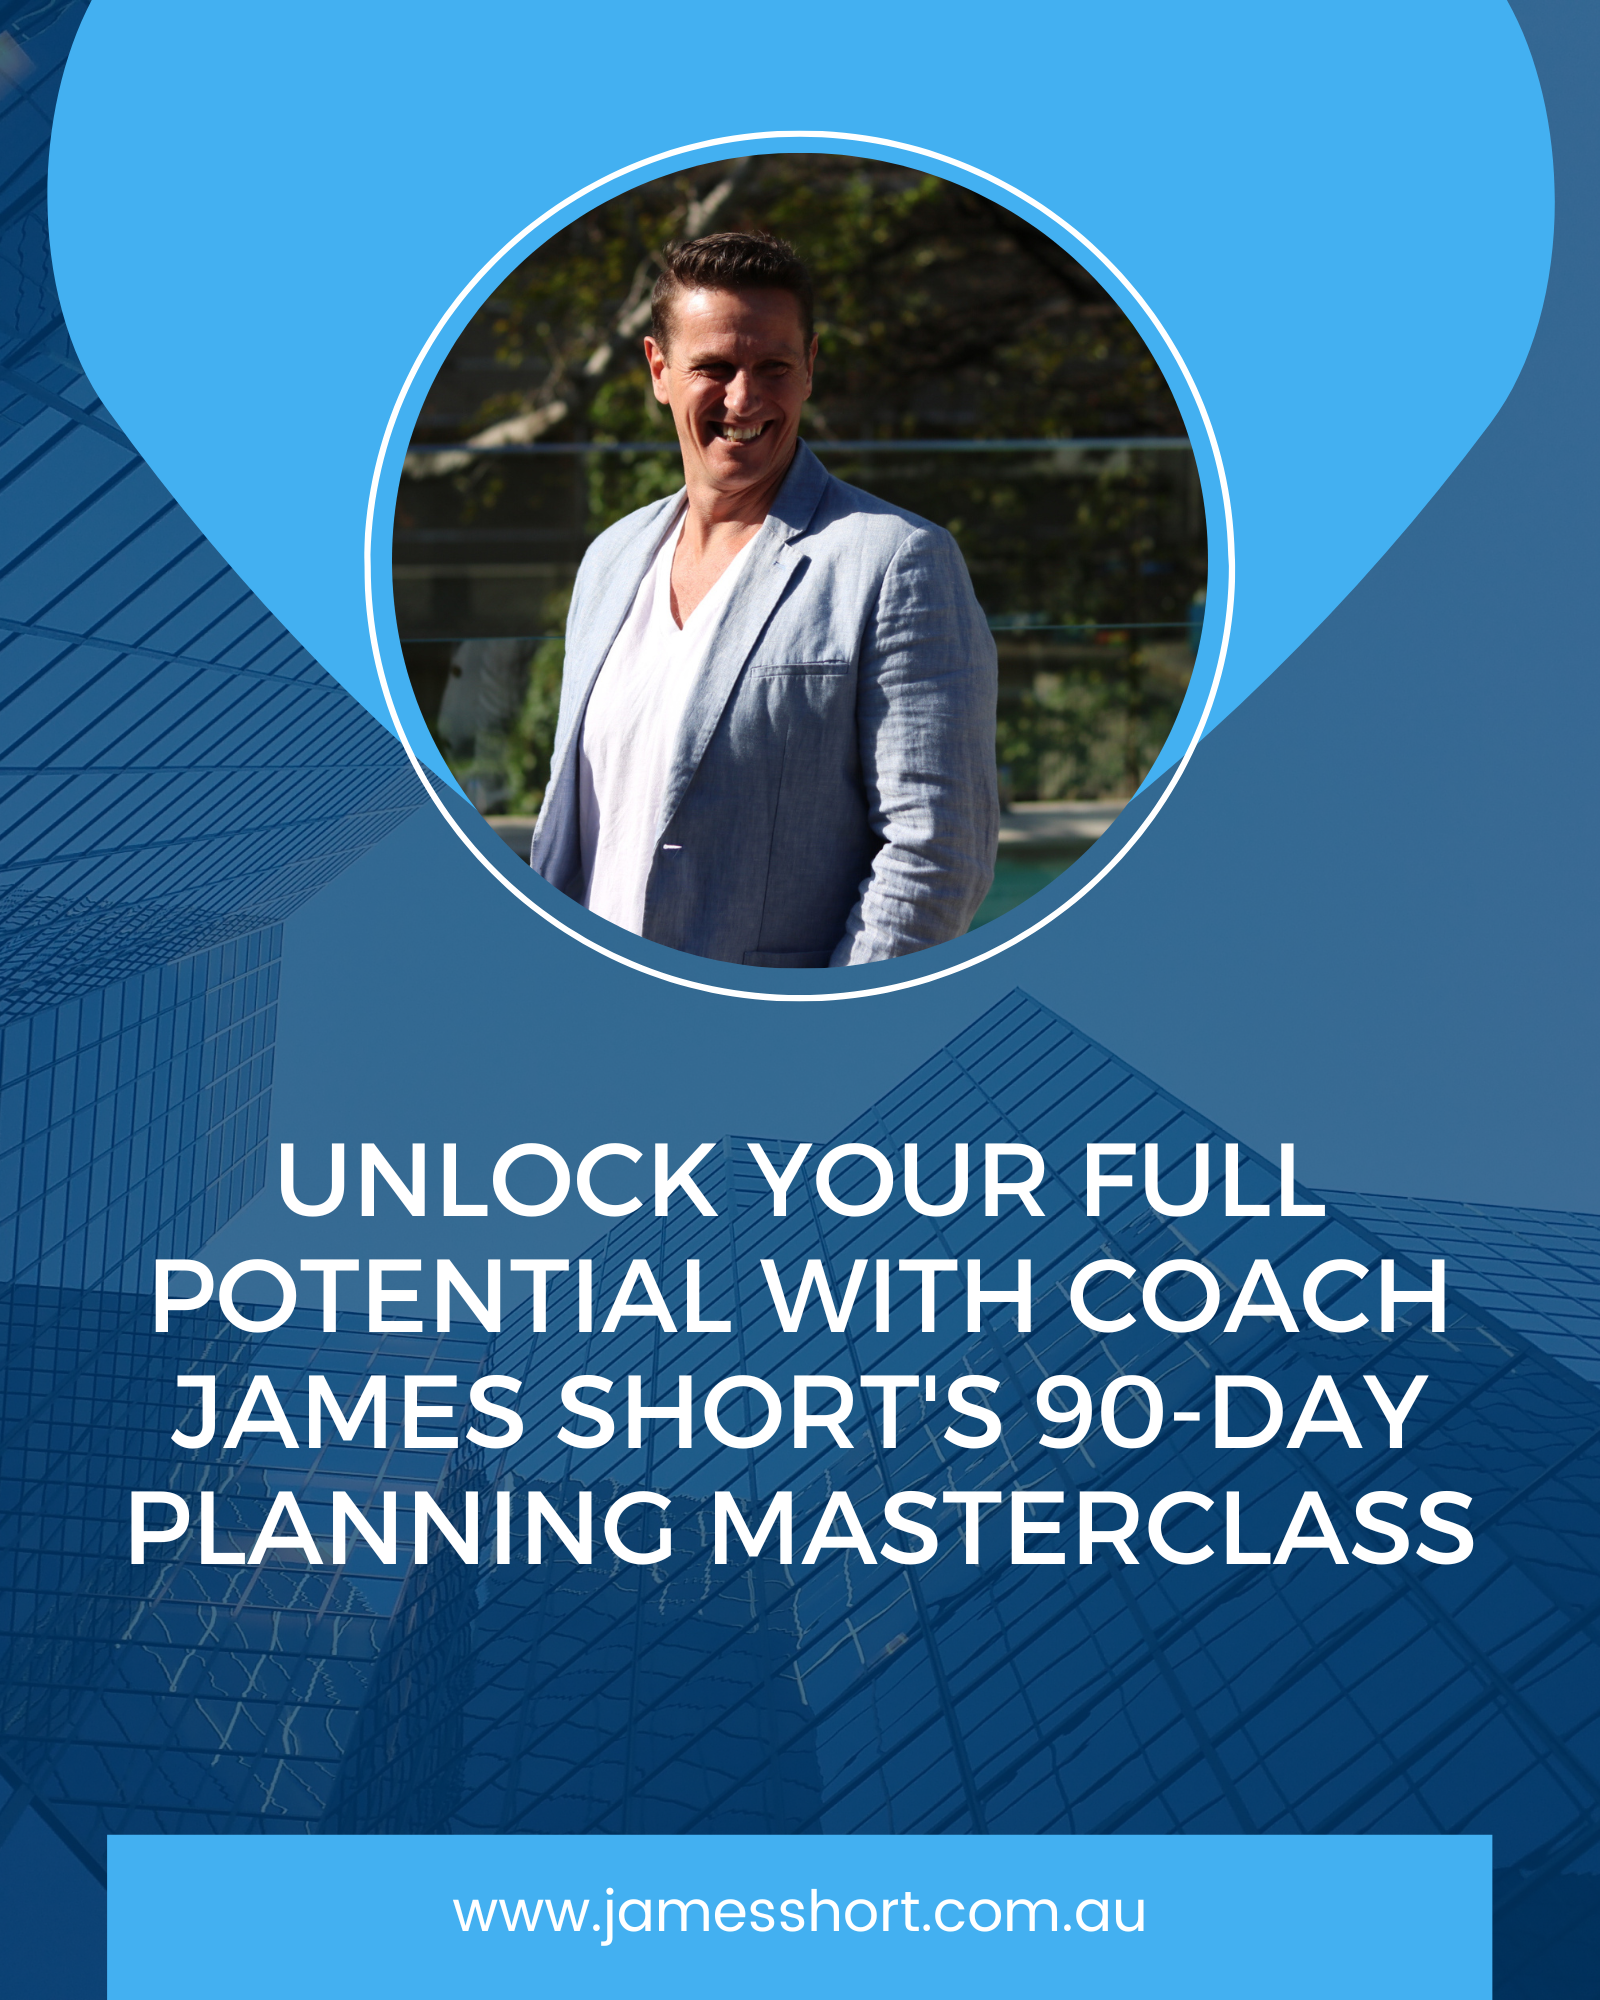 Unlock Your Full Potential with Coach James Short’s 90-Day Planning Masterclass